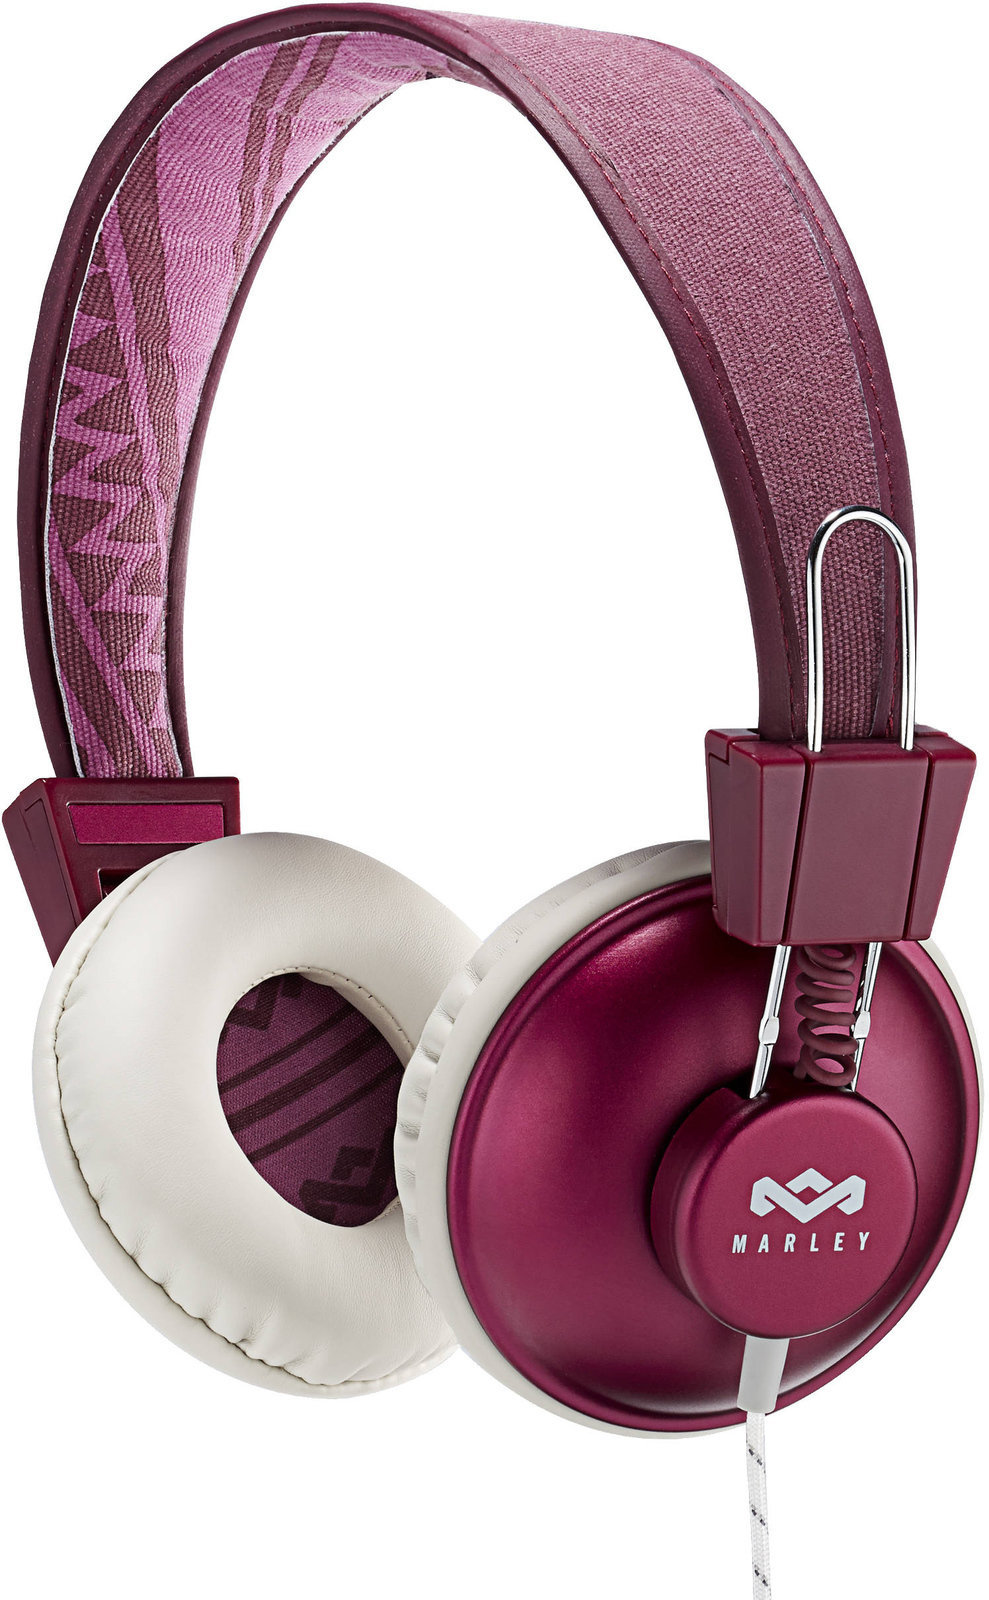 Casque de diffusion House of Marley Positive Vibration 1-Button Remote with Mic Purple